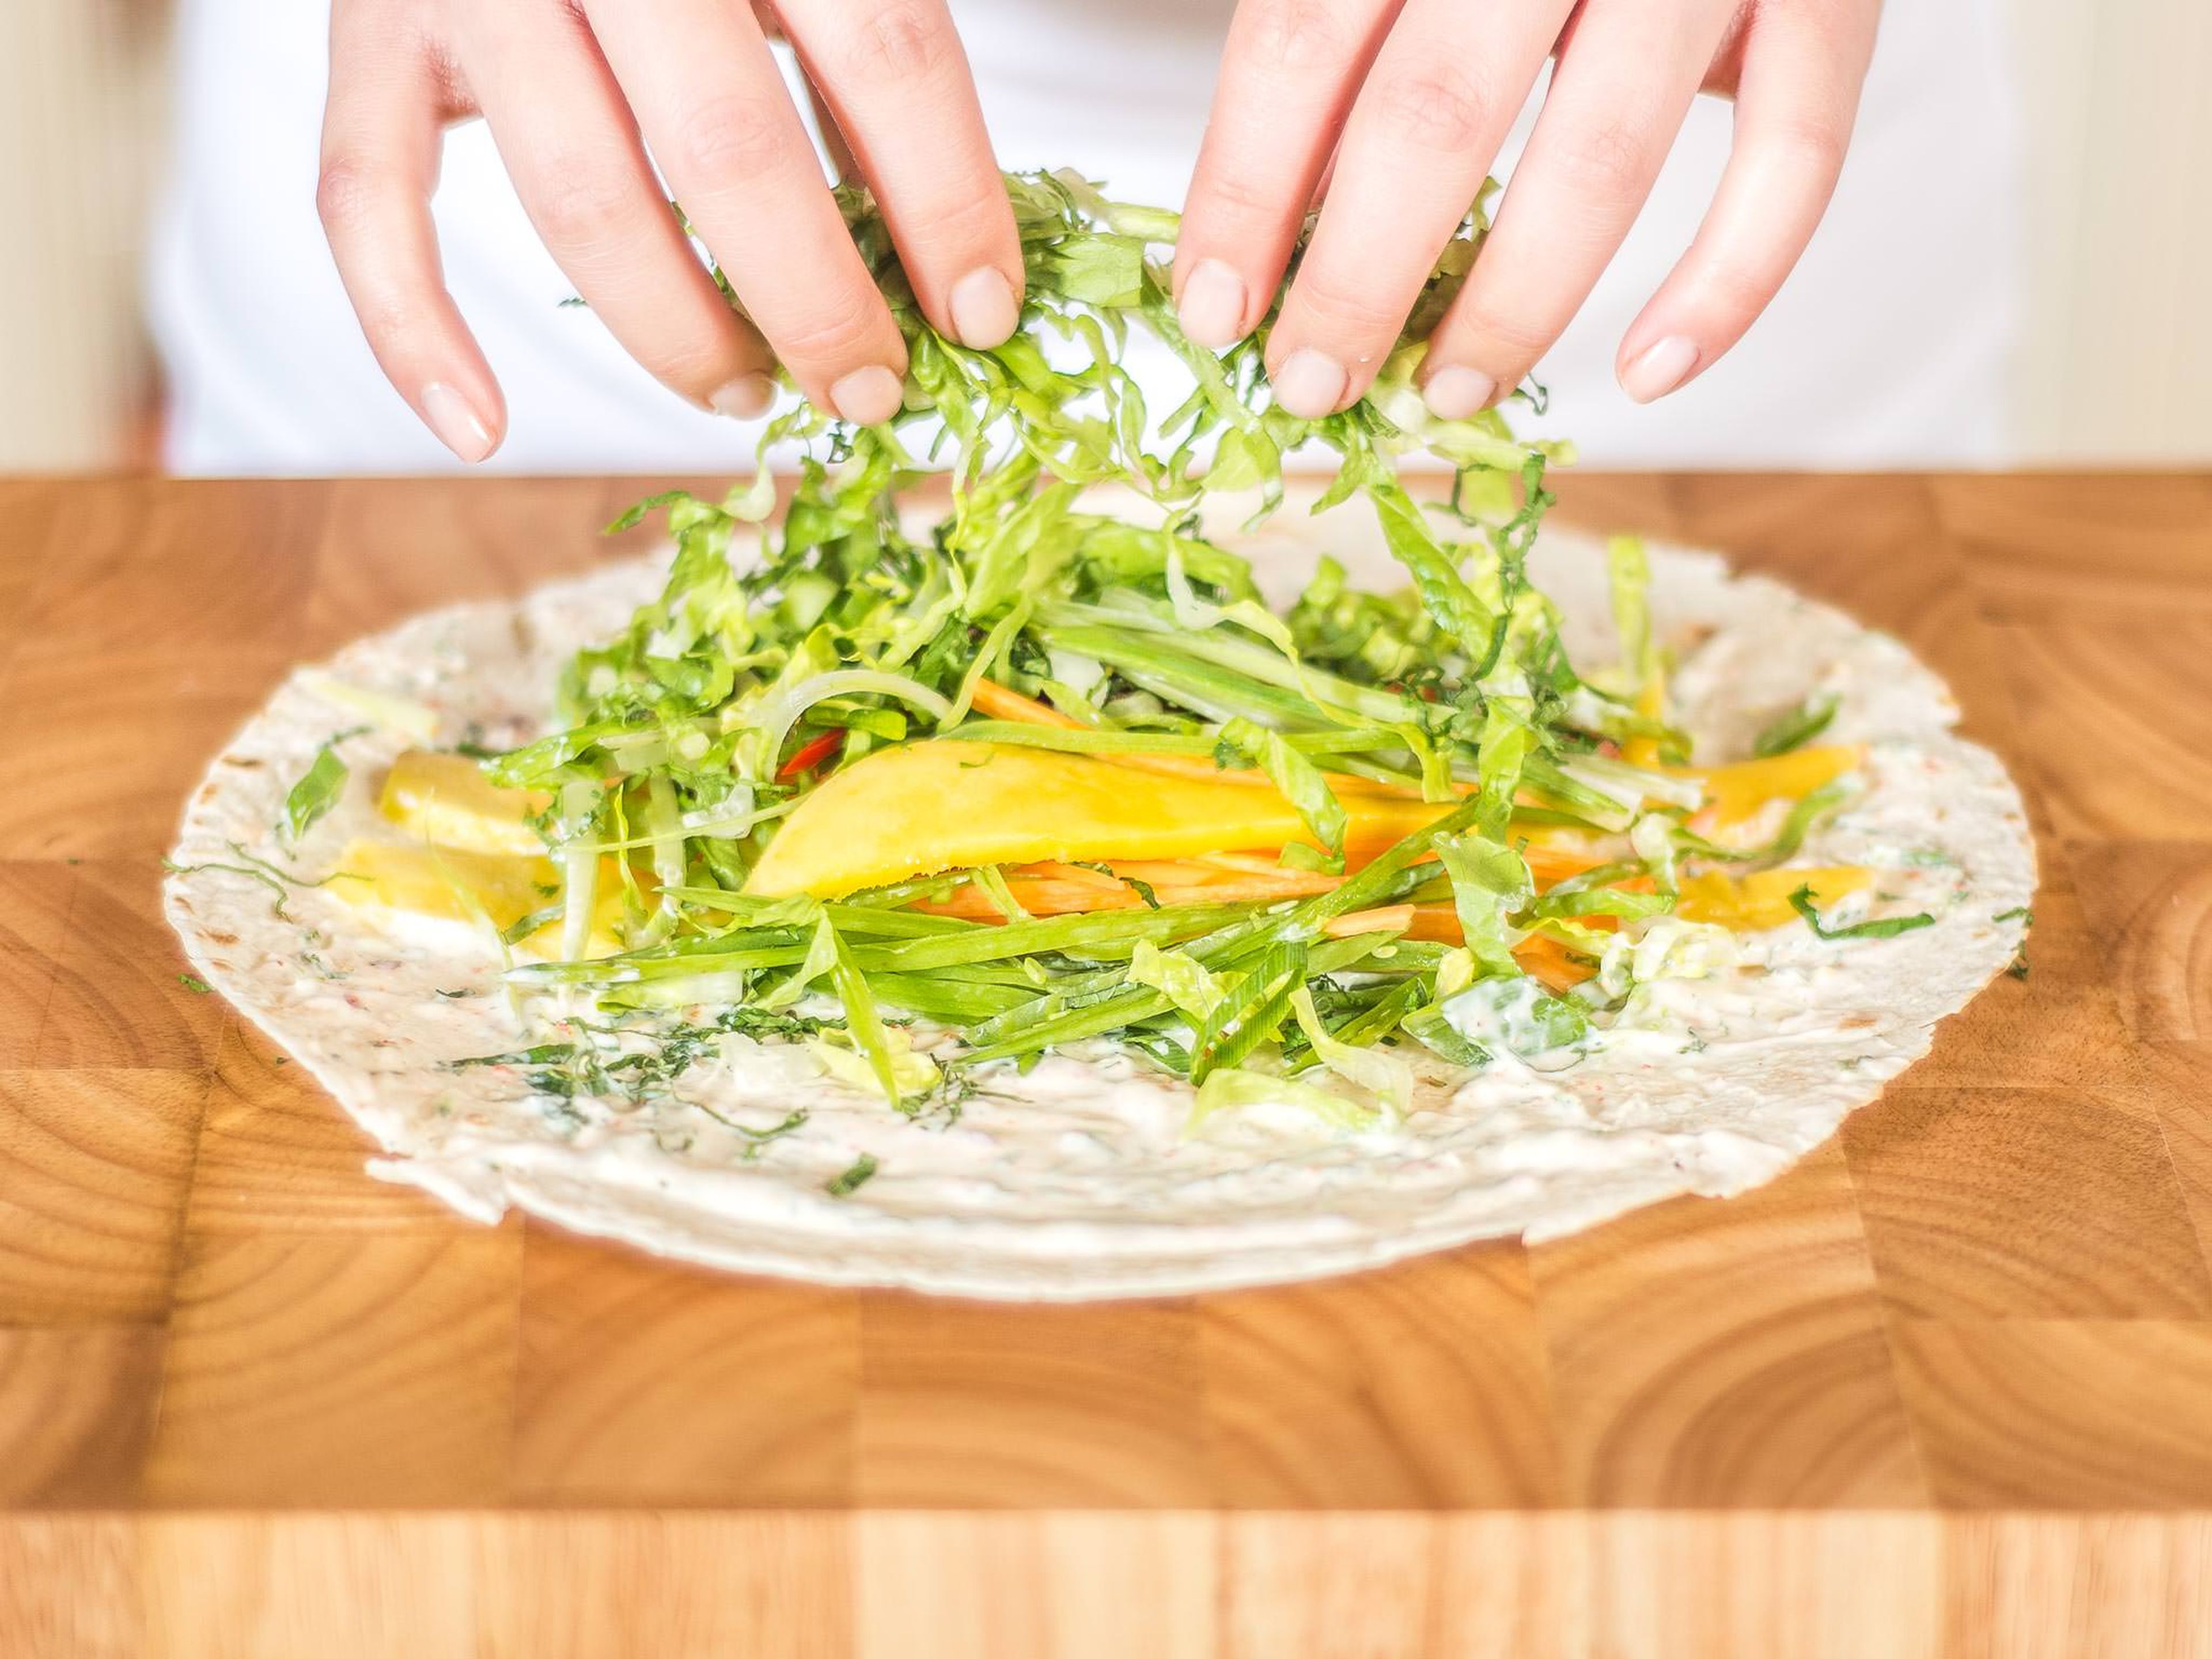 Spread the mixture onto the wraps. Top with sliced vegetables, parsley, and mango.